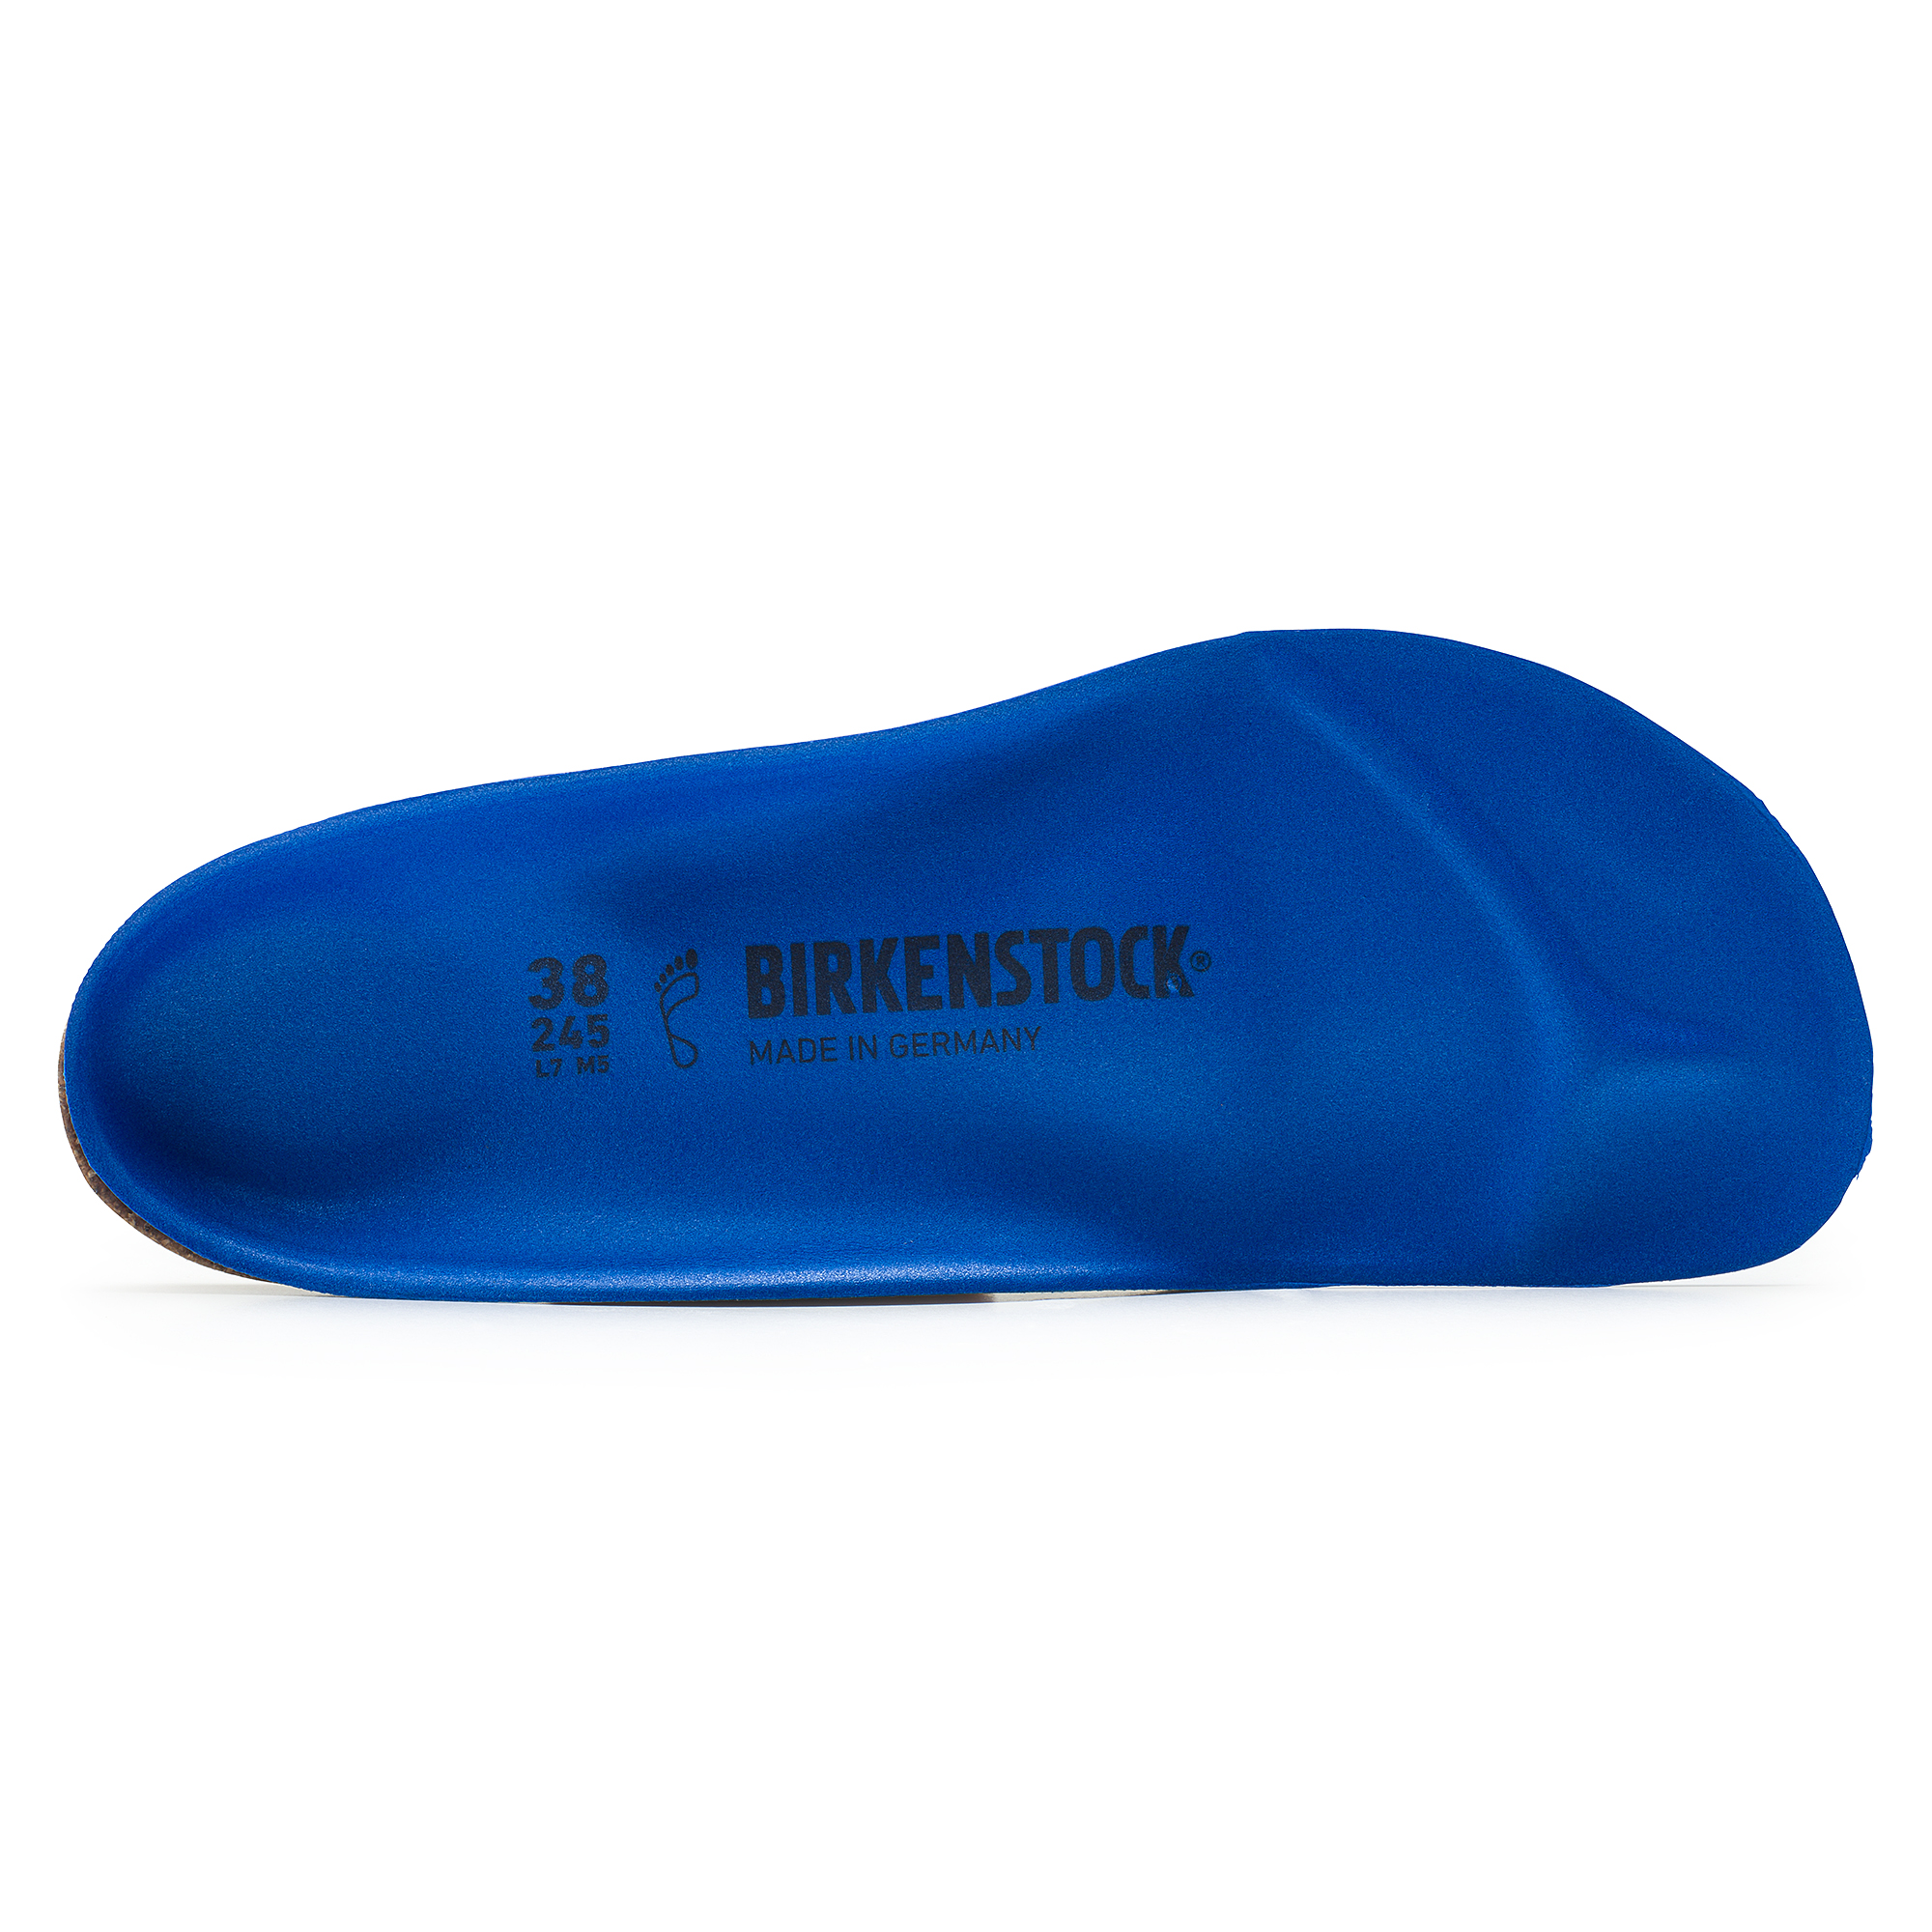 birkenstock blue footbed sport arch support insoles